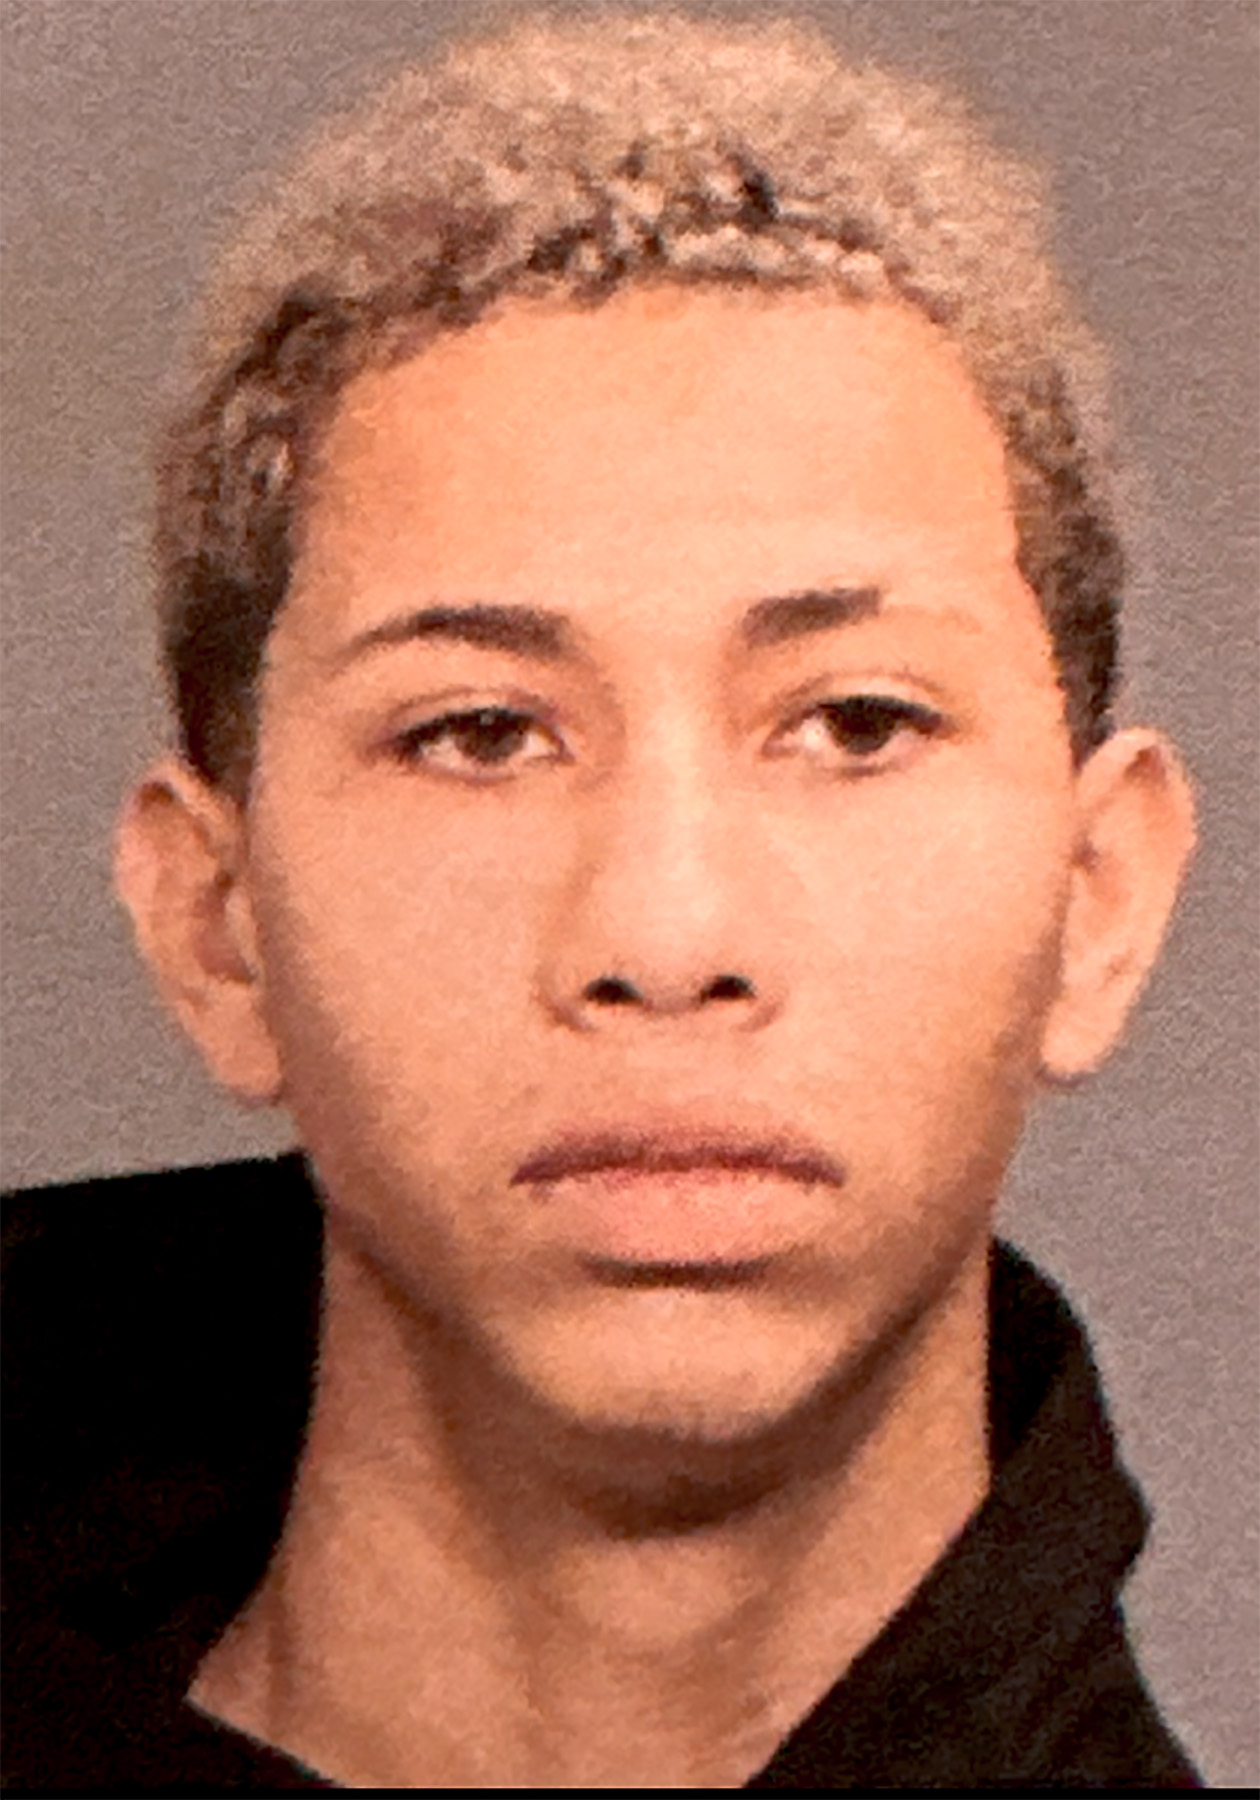 Cops arrested Darwin Andres Gomez-Izquiel on a shoplifting charge in Queens. He had previously been arrested for assaulting cops in Times Square. -Photo by NYPD